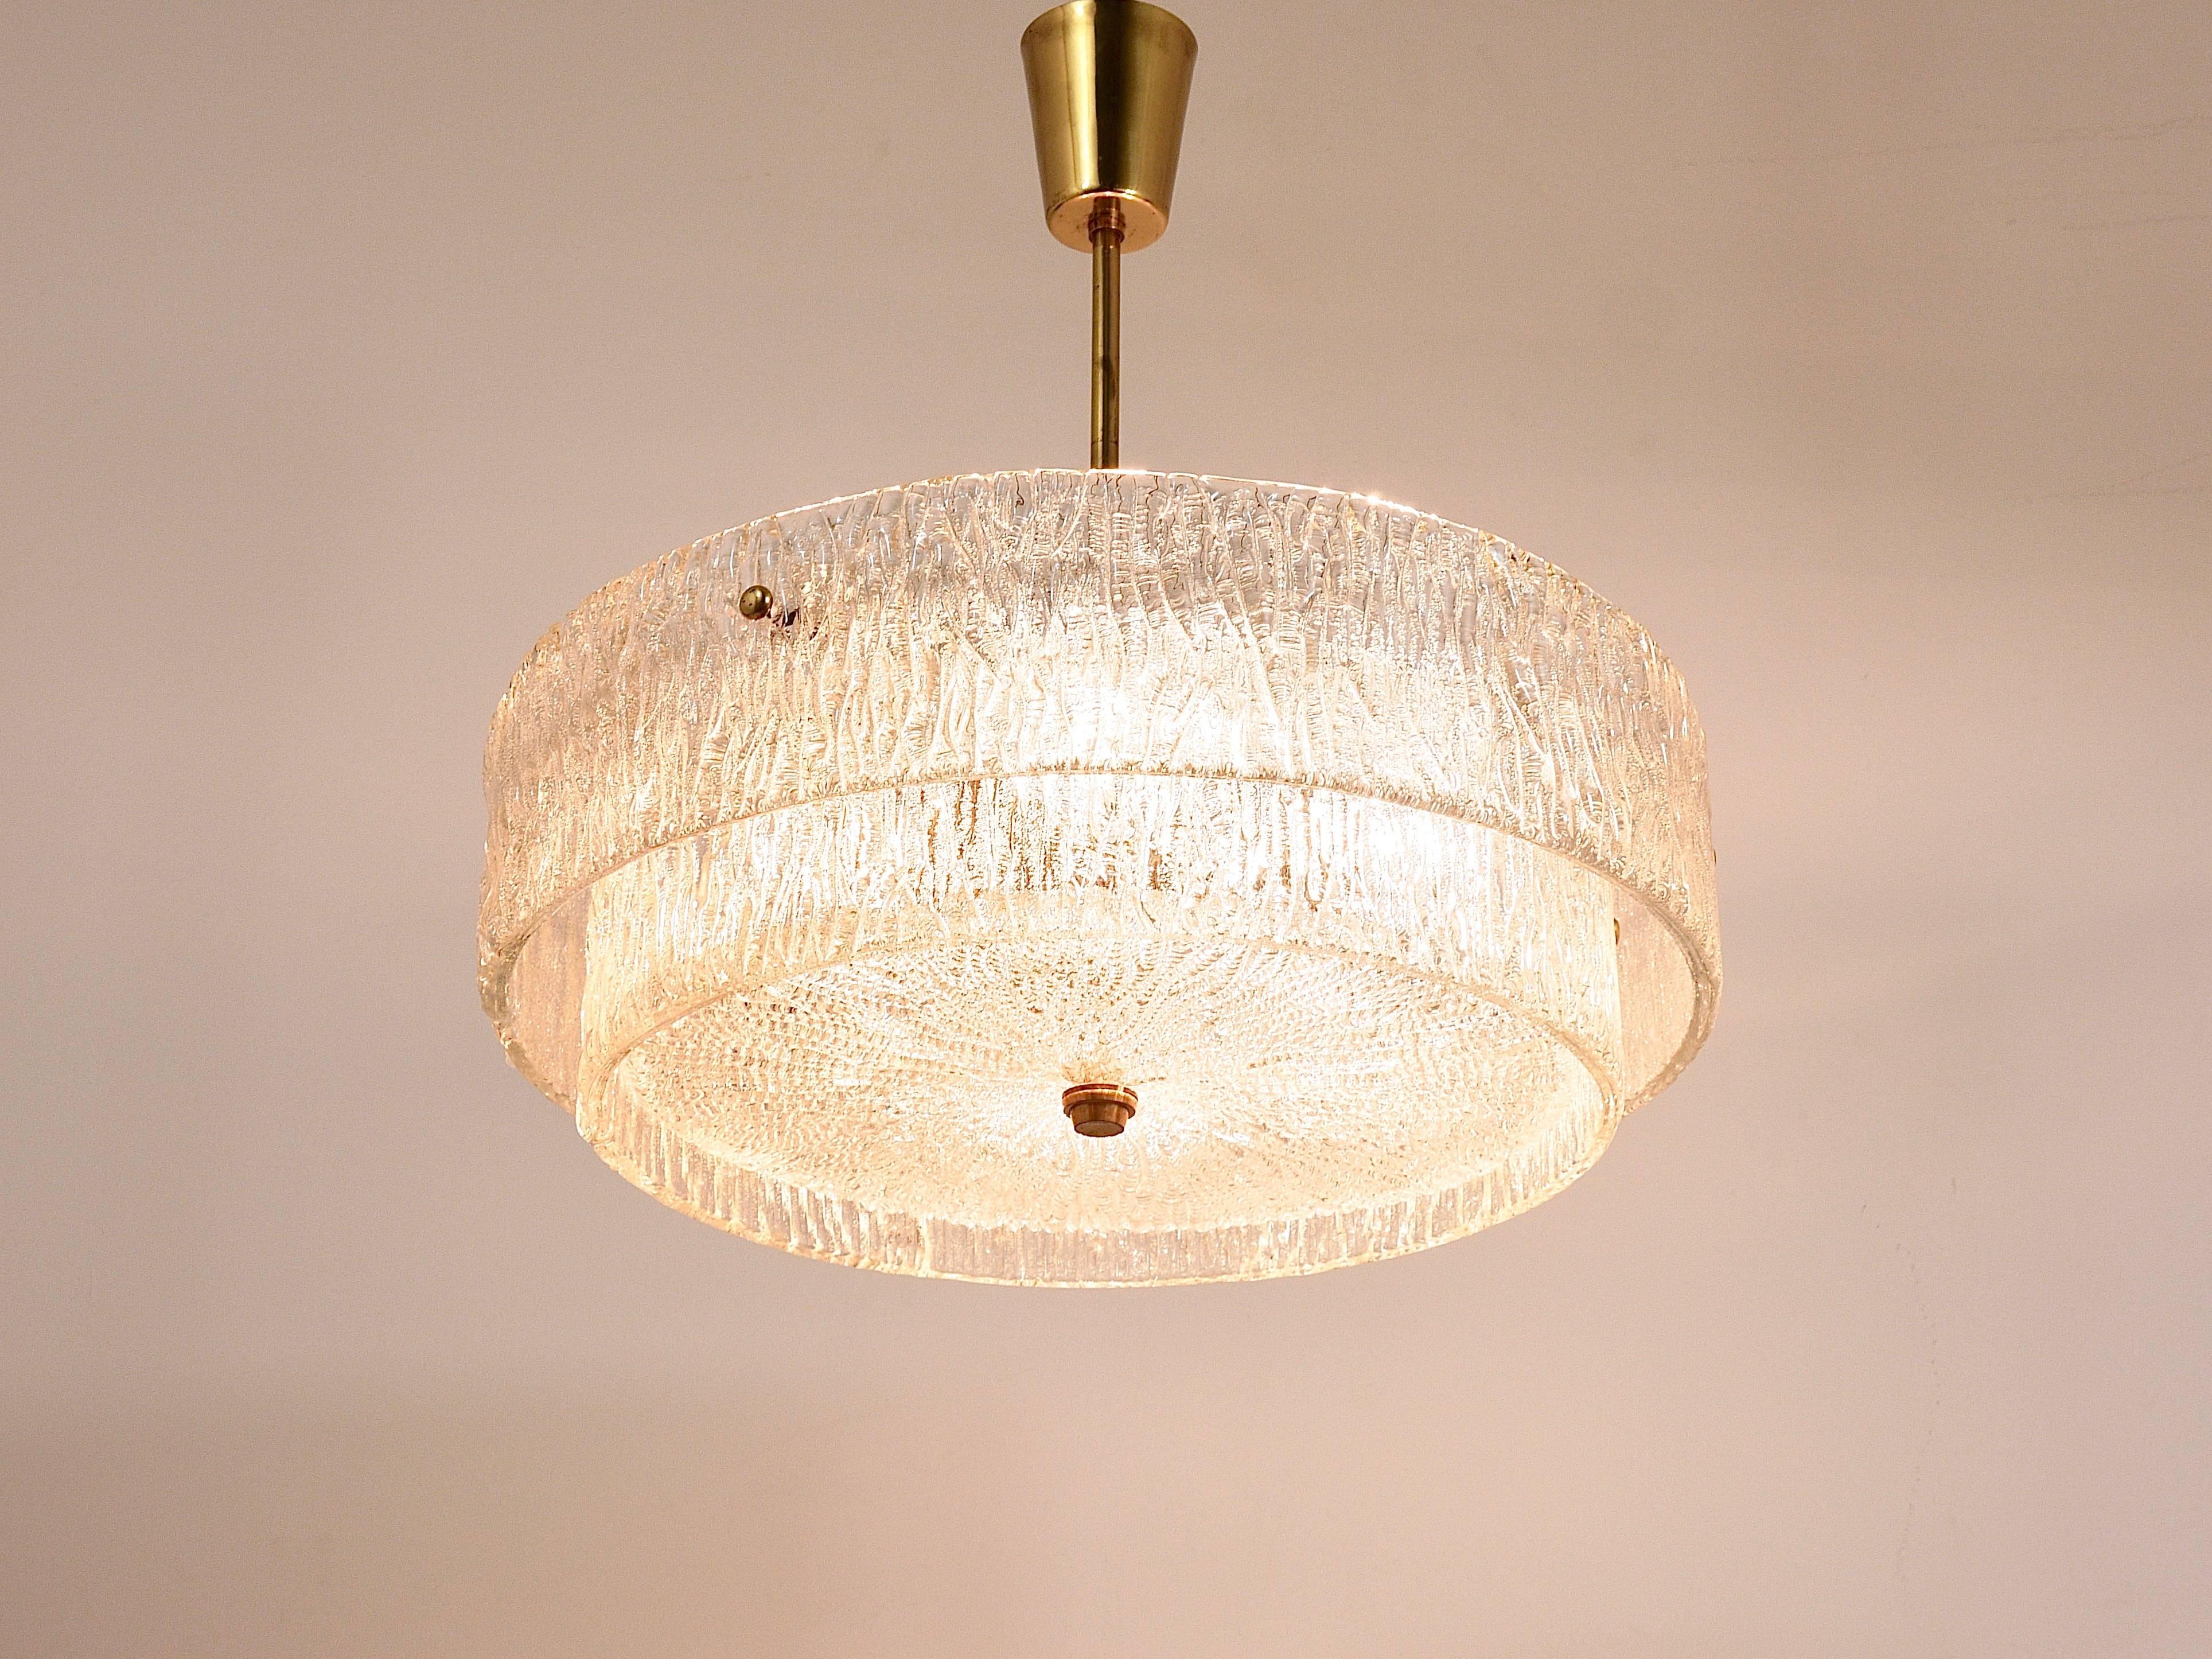 A beautiful modernist brass chandelier from the 1950s. Executed by Kalmar, Austria. Has two big glass rings made of textured ice glass. White painted base with brass rod and nice brass knobs. In very condition with marginal patina on the brass.